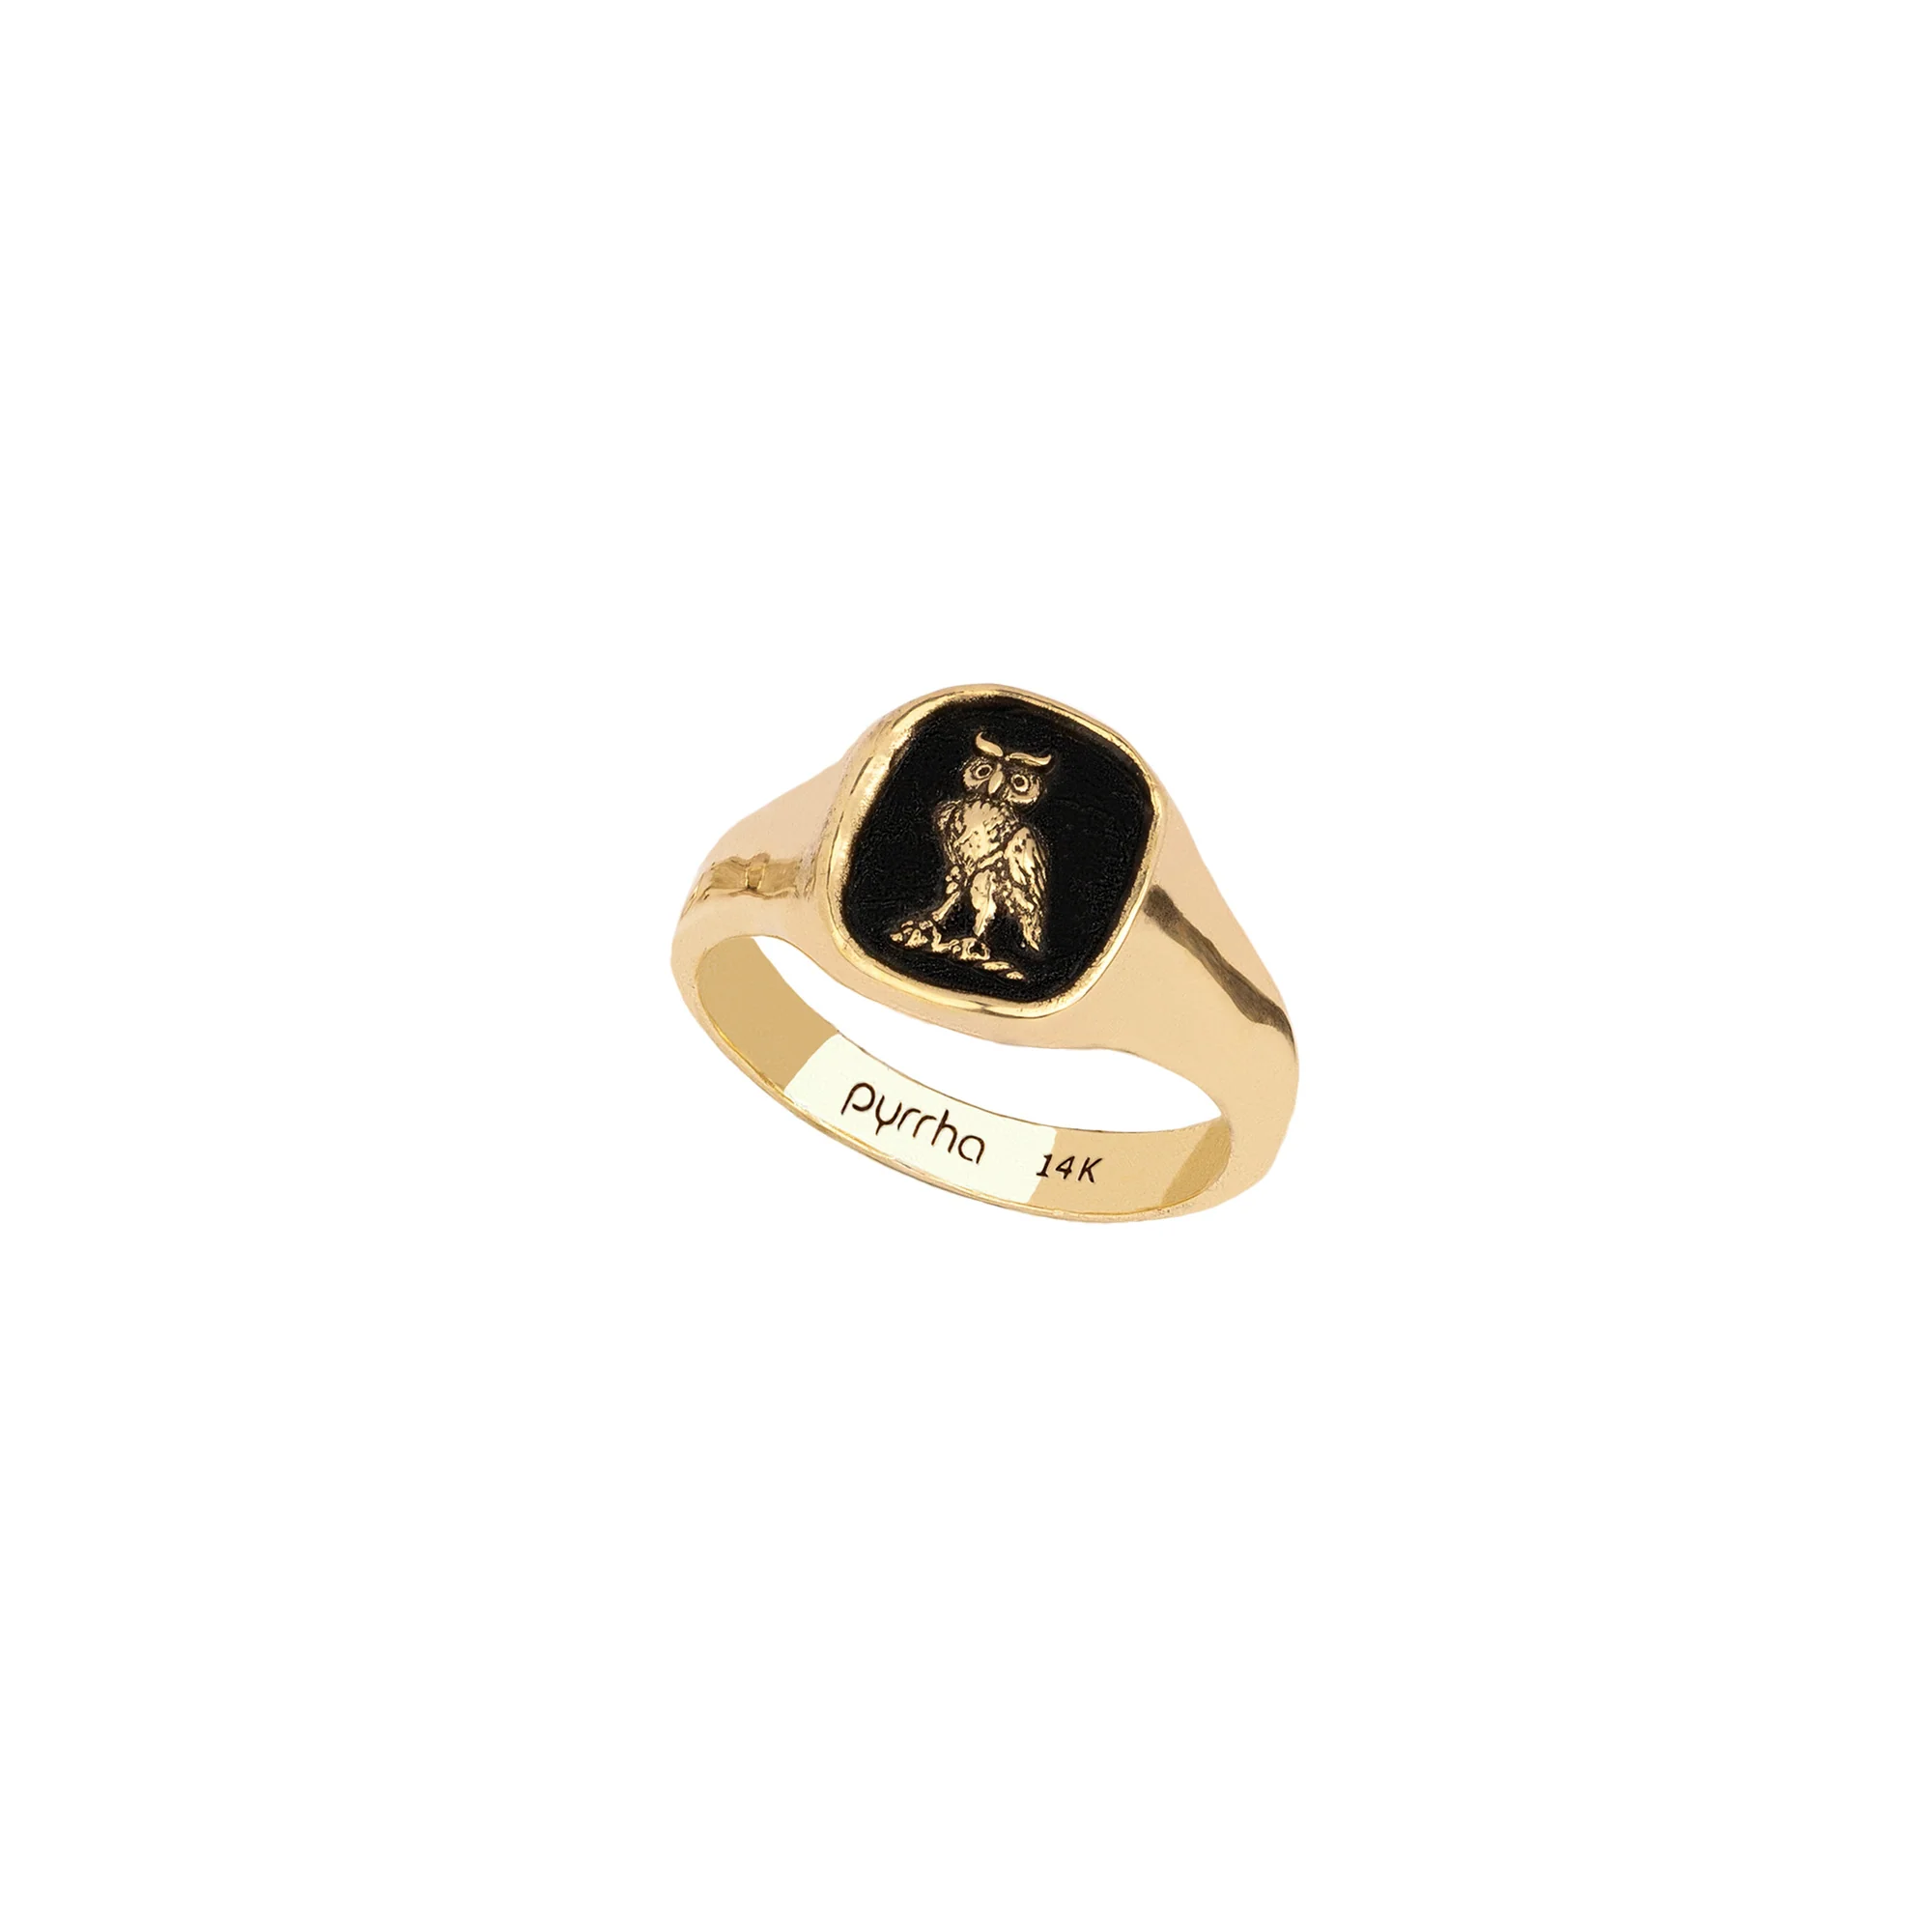 Watch Over Me 14K Gold Signet Ring | Magpie Jewellery